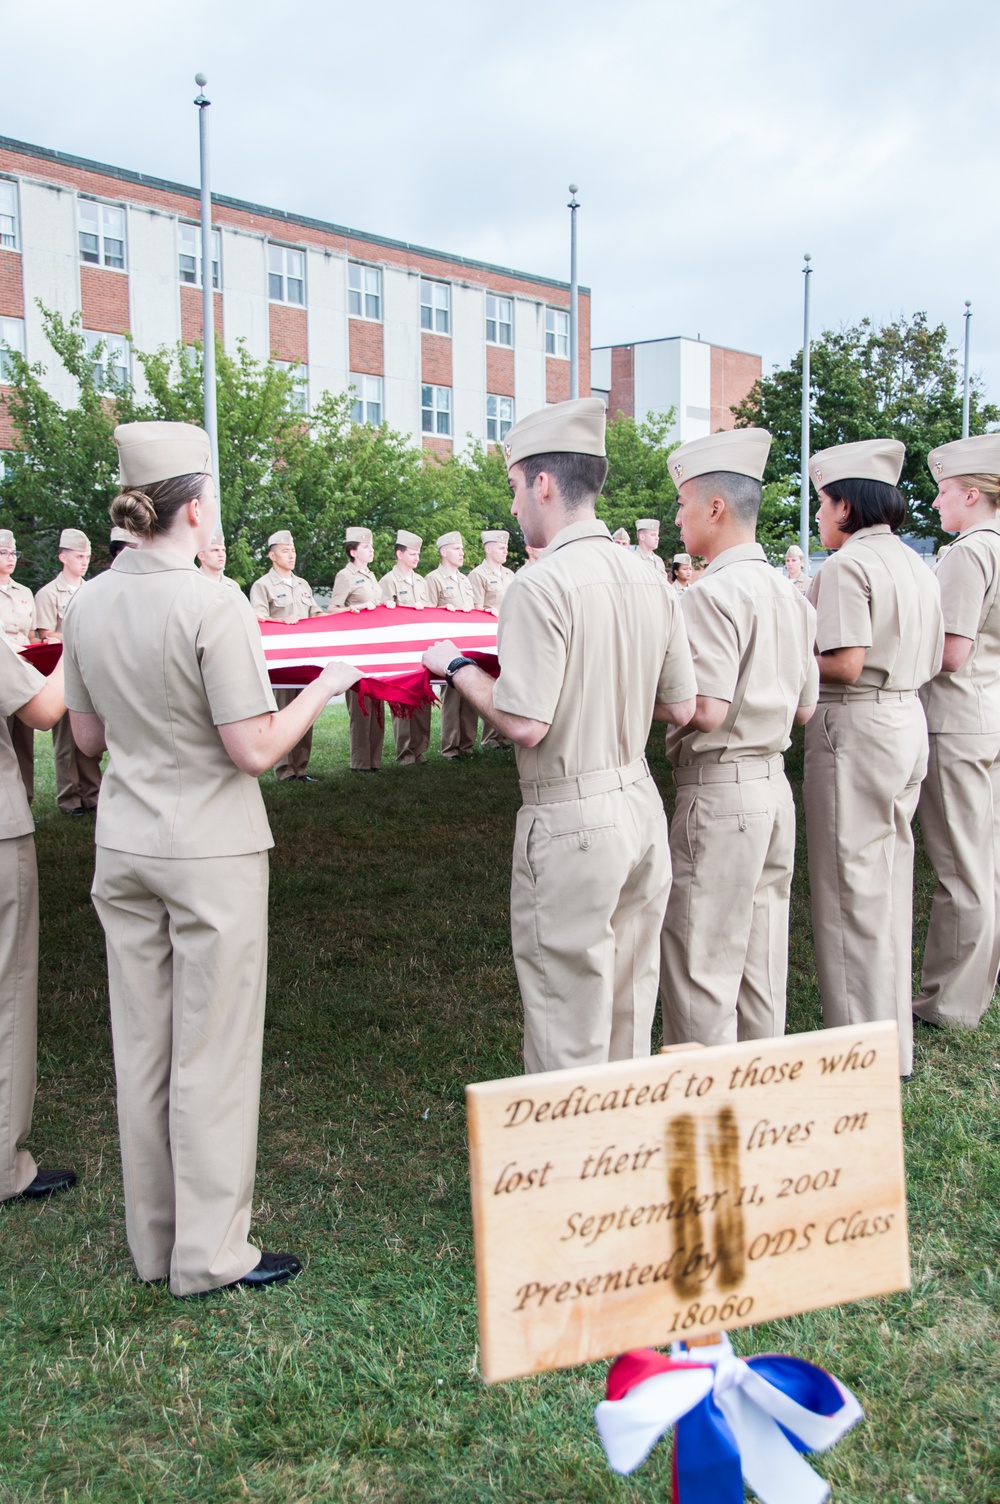 190911-N-TE695-0005 NEWPORT, R.I. (Sept. 11, 2019) — Graduating class 19060 of Officer Development School (ODS) at Officer Training Command, Newport, Rhode Island, conducts a flag ceremony in remembrance of the 9/11 attacks on Sept. 11, 2019.